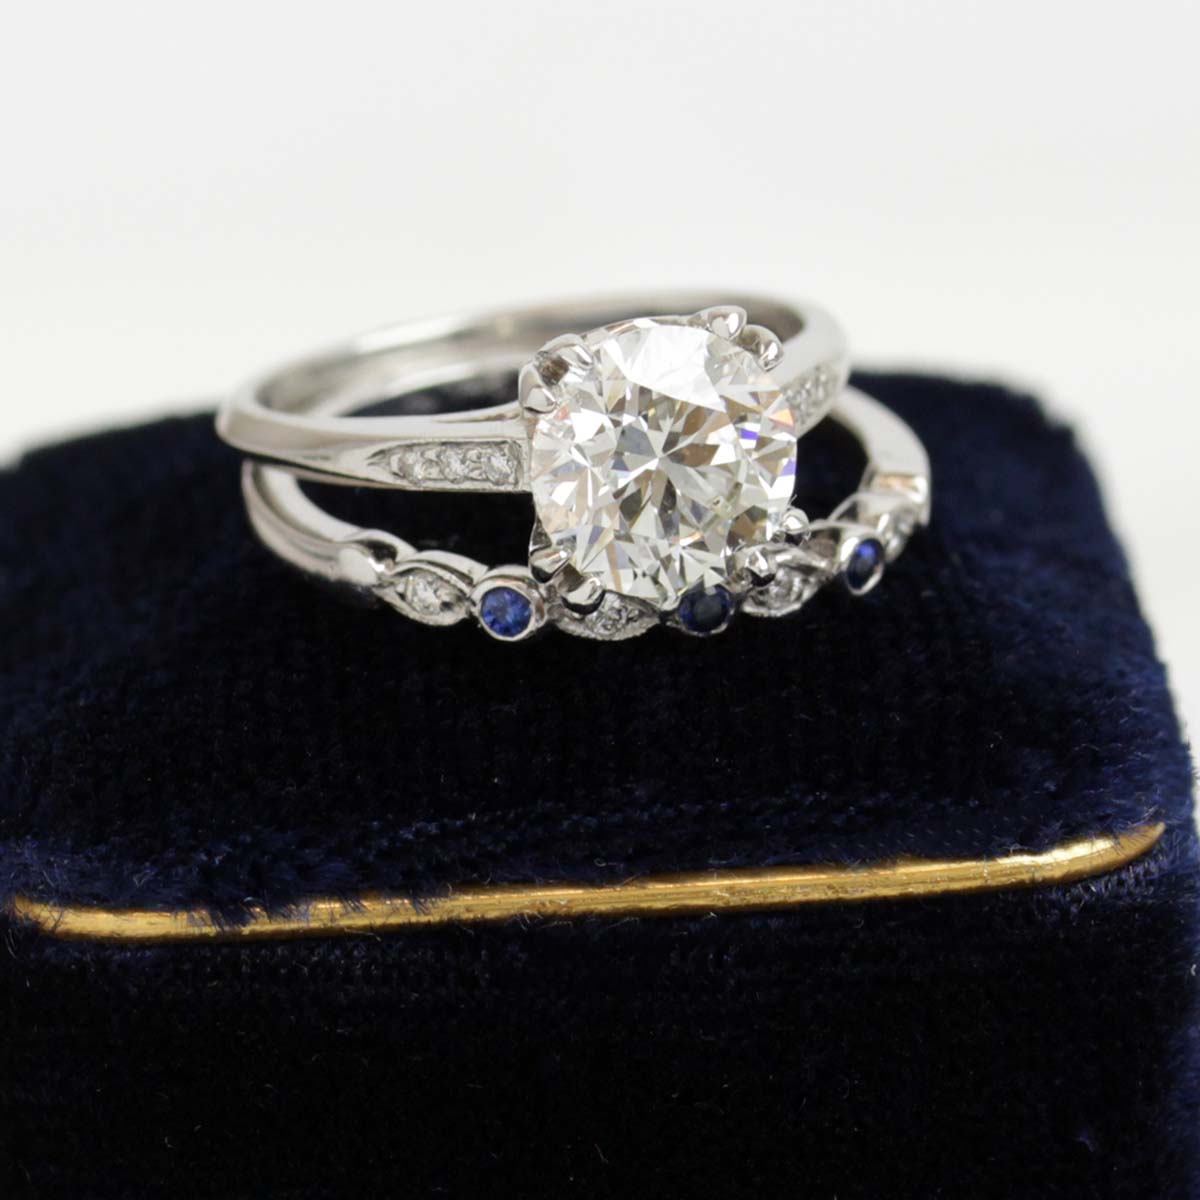 Platinum Reproduction of a 1930s Era Engagement ring #3104-11